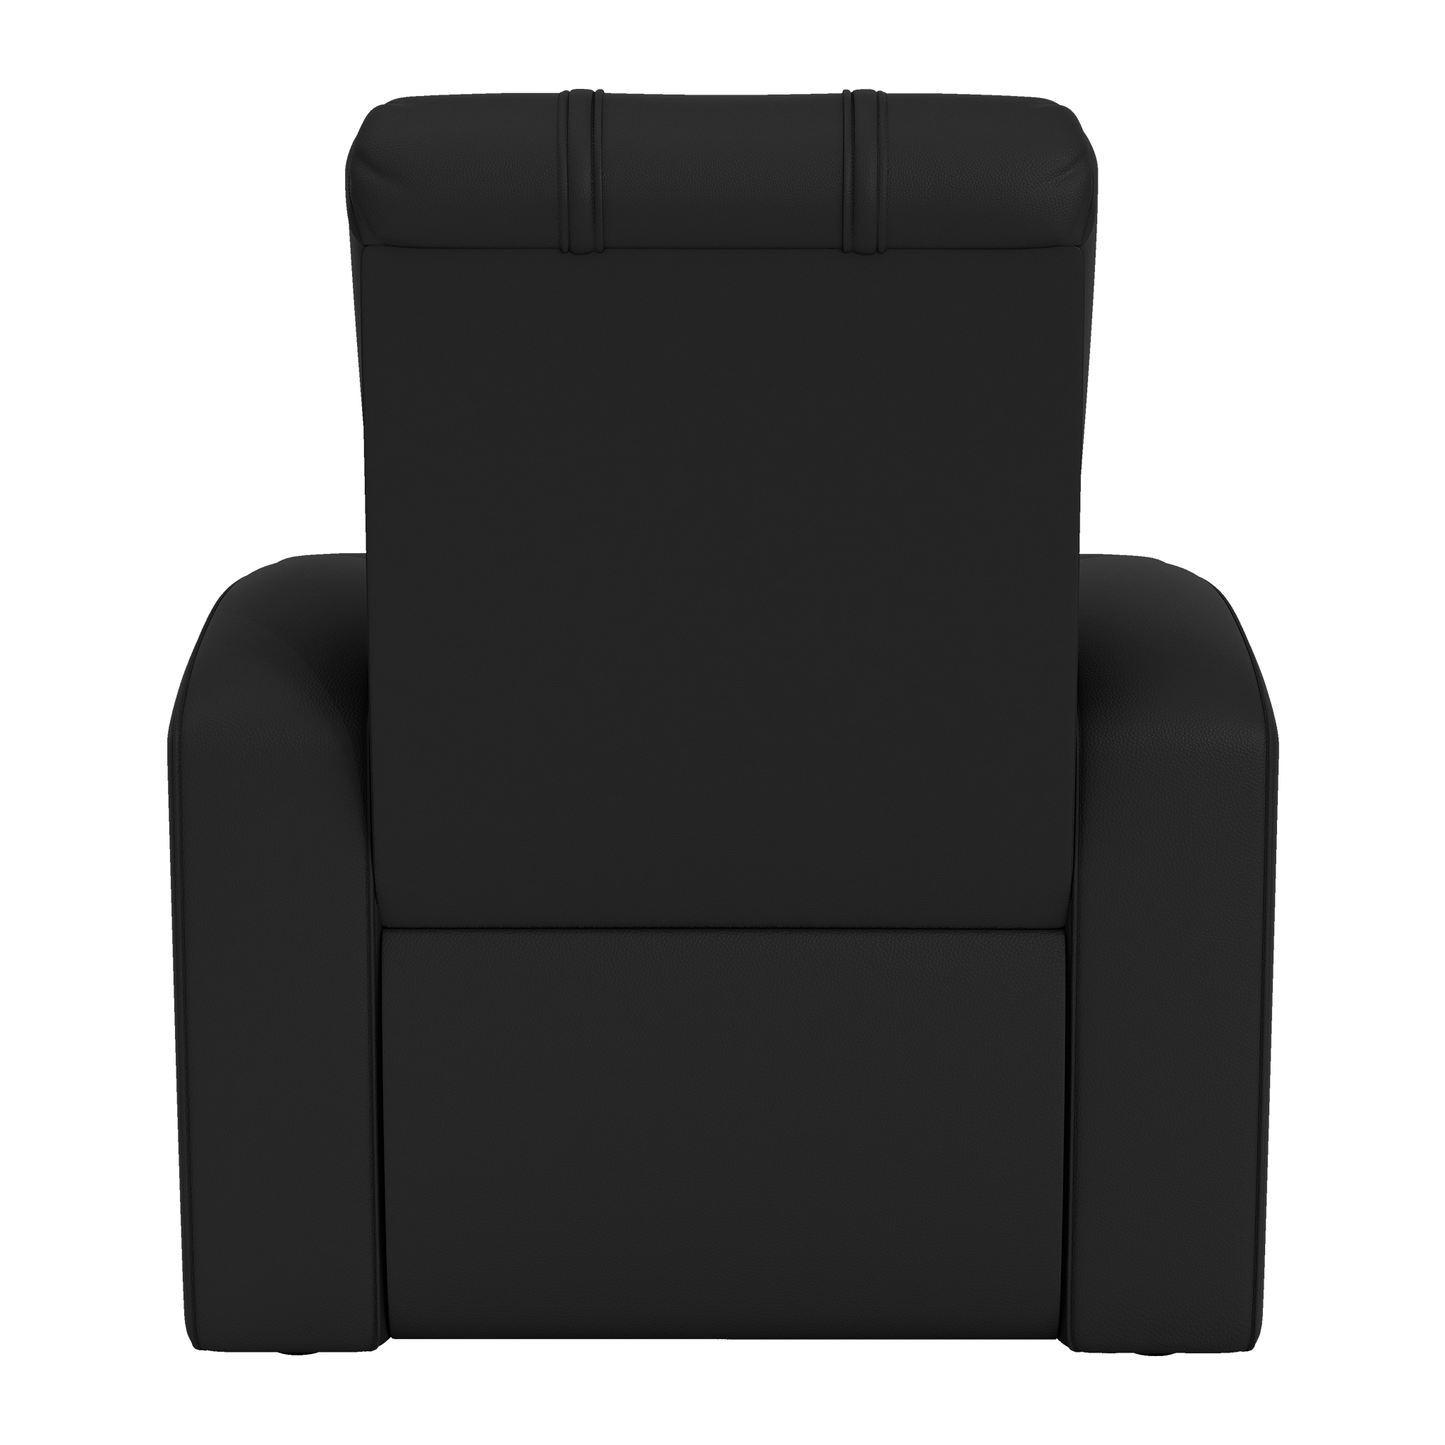 Relax Home Theater Recliner with Mississippi Rebels Logo